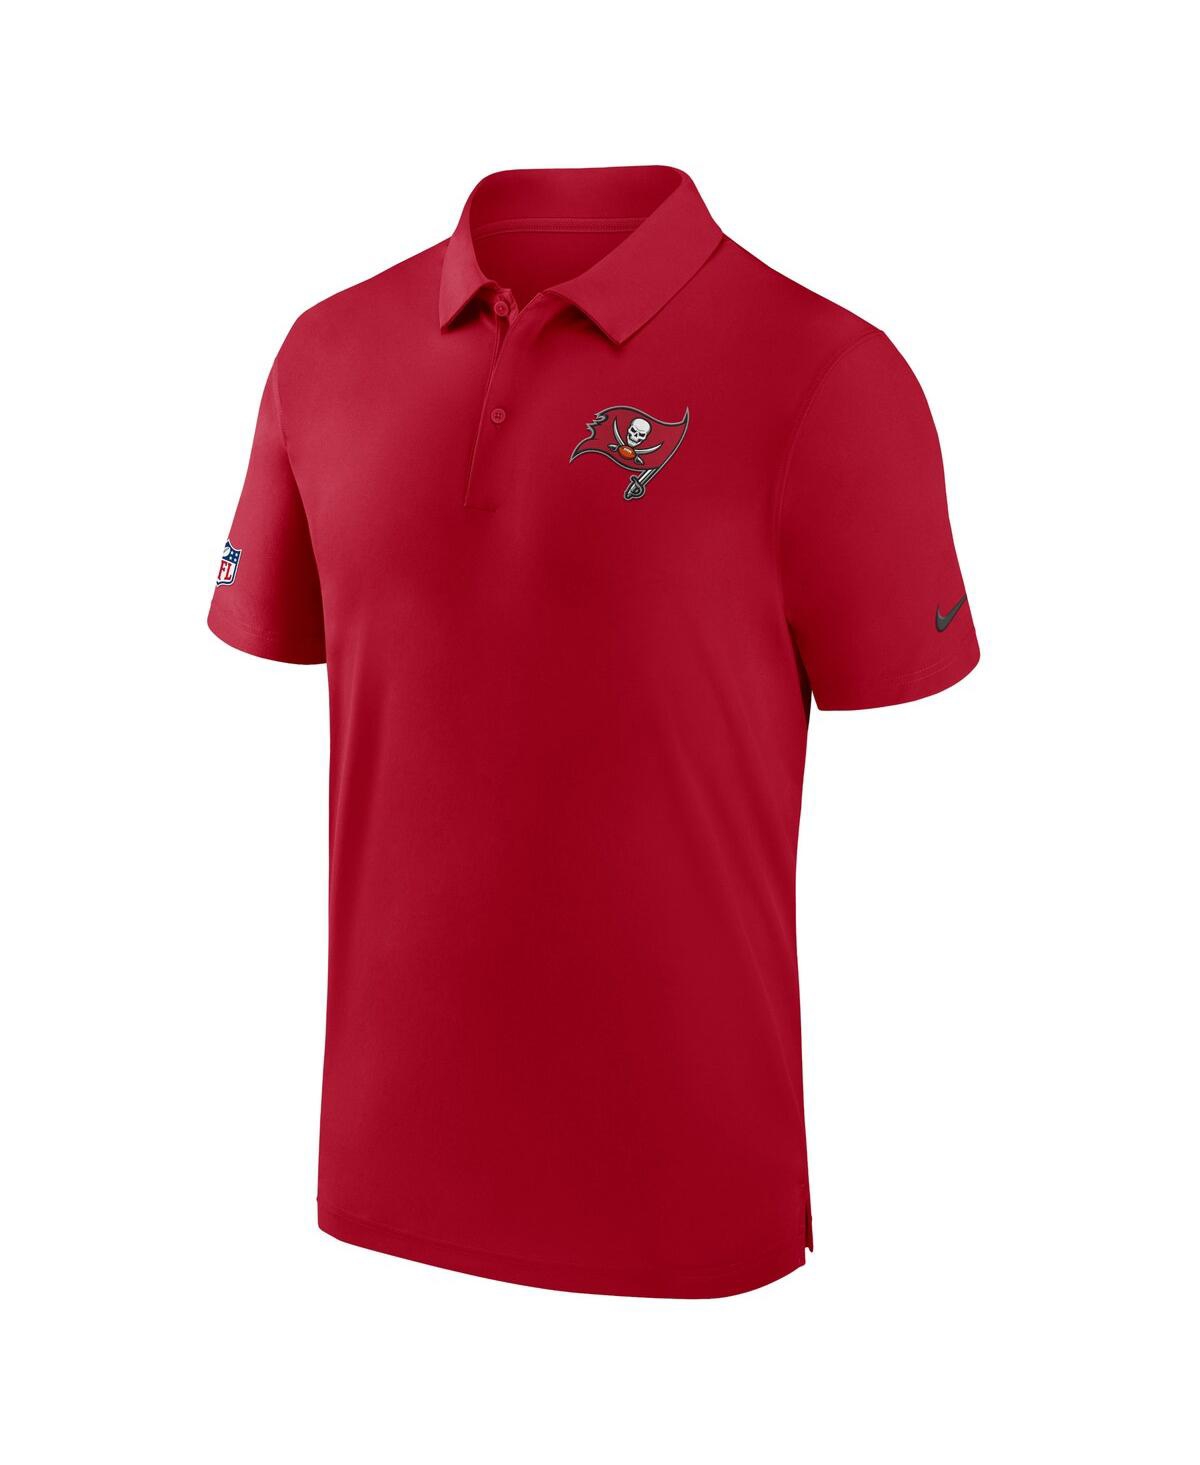 Shop Nike Men's  Red Tampa Bay Buccaneers Sideline Coaches Performance Polo Shirt